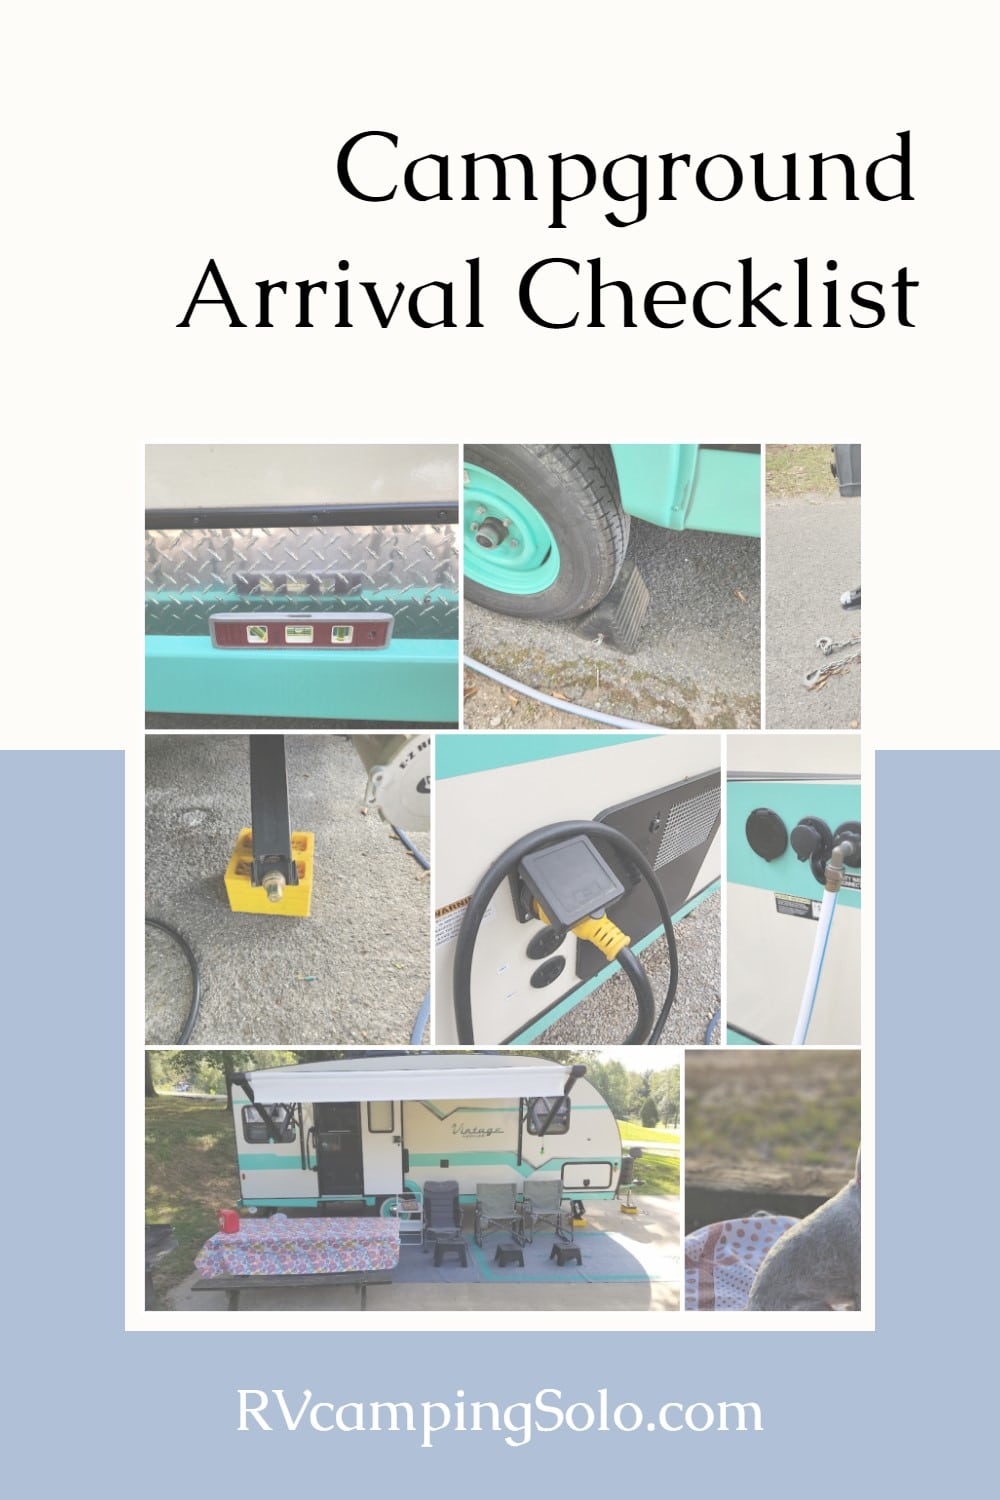 Are you looking for an rv arrival checklist? Tips for what to do when you get to the campground? New to camping? You're in the right place. #rvcampingsolo via @repurposedlife